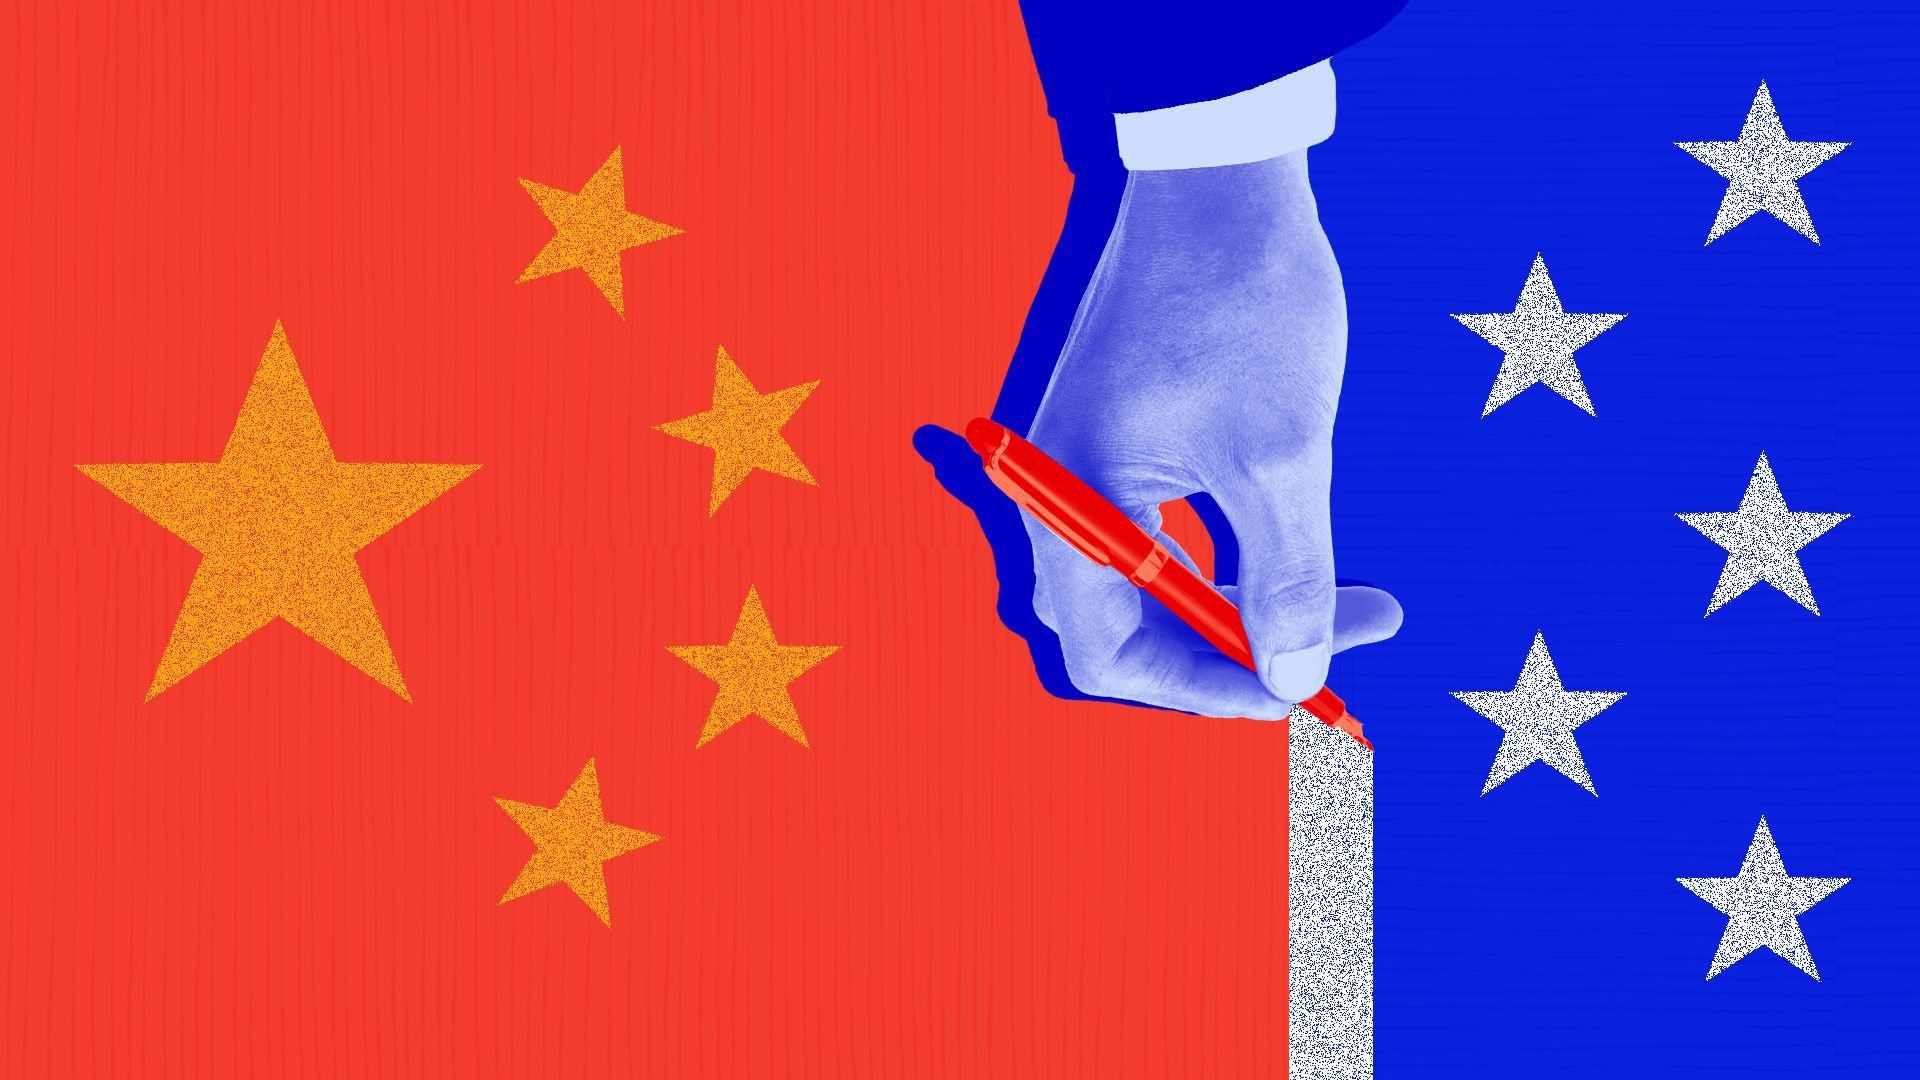 Illustration of a hand drawing a line between the Chinese and U.S. flags